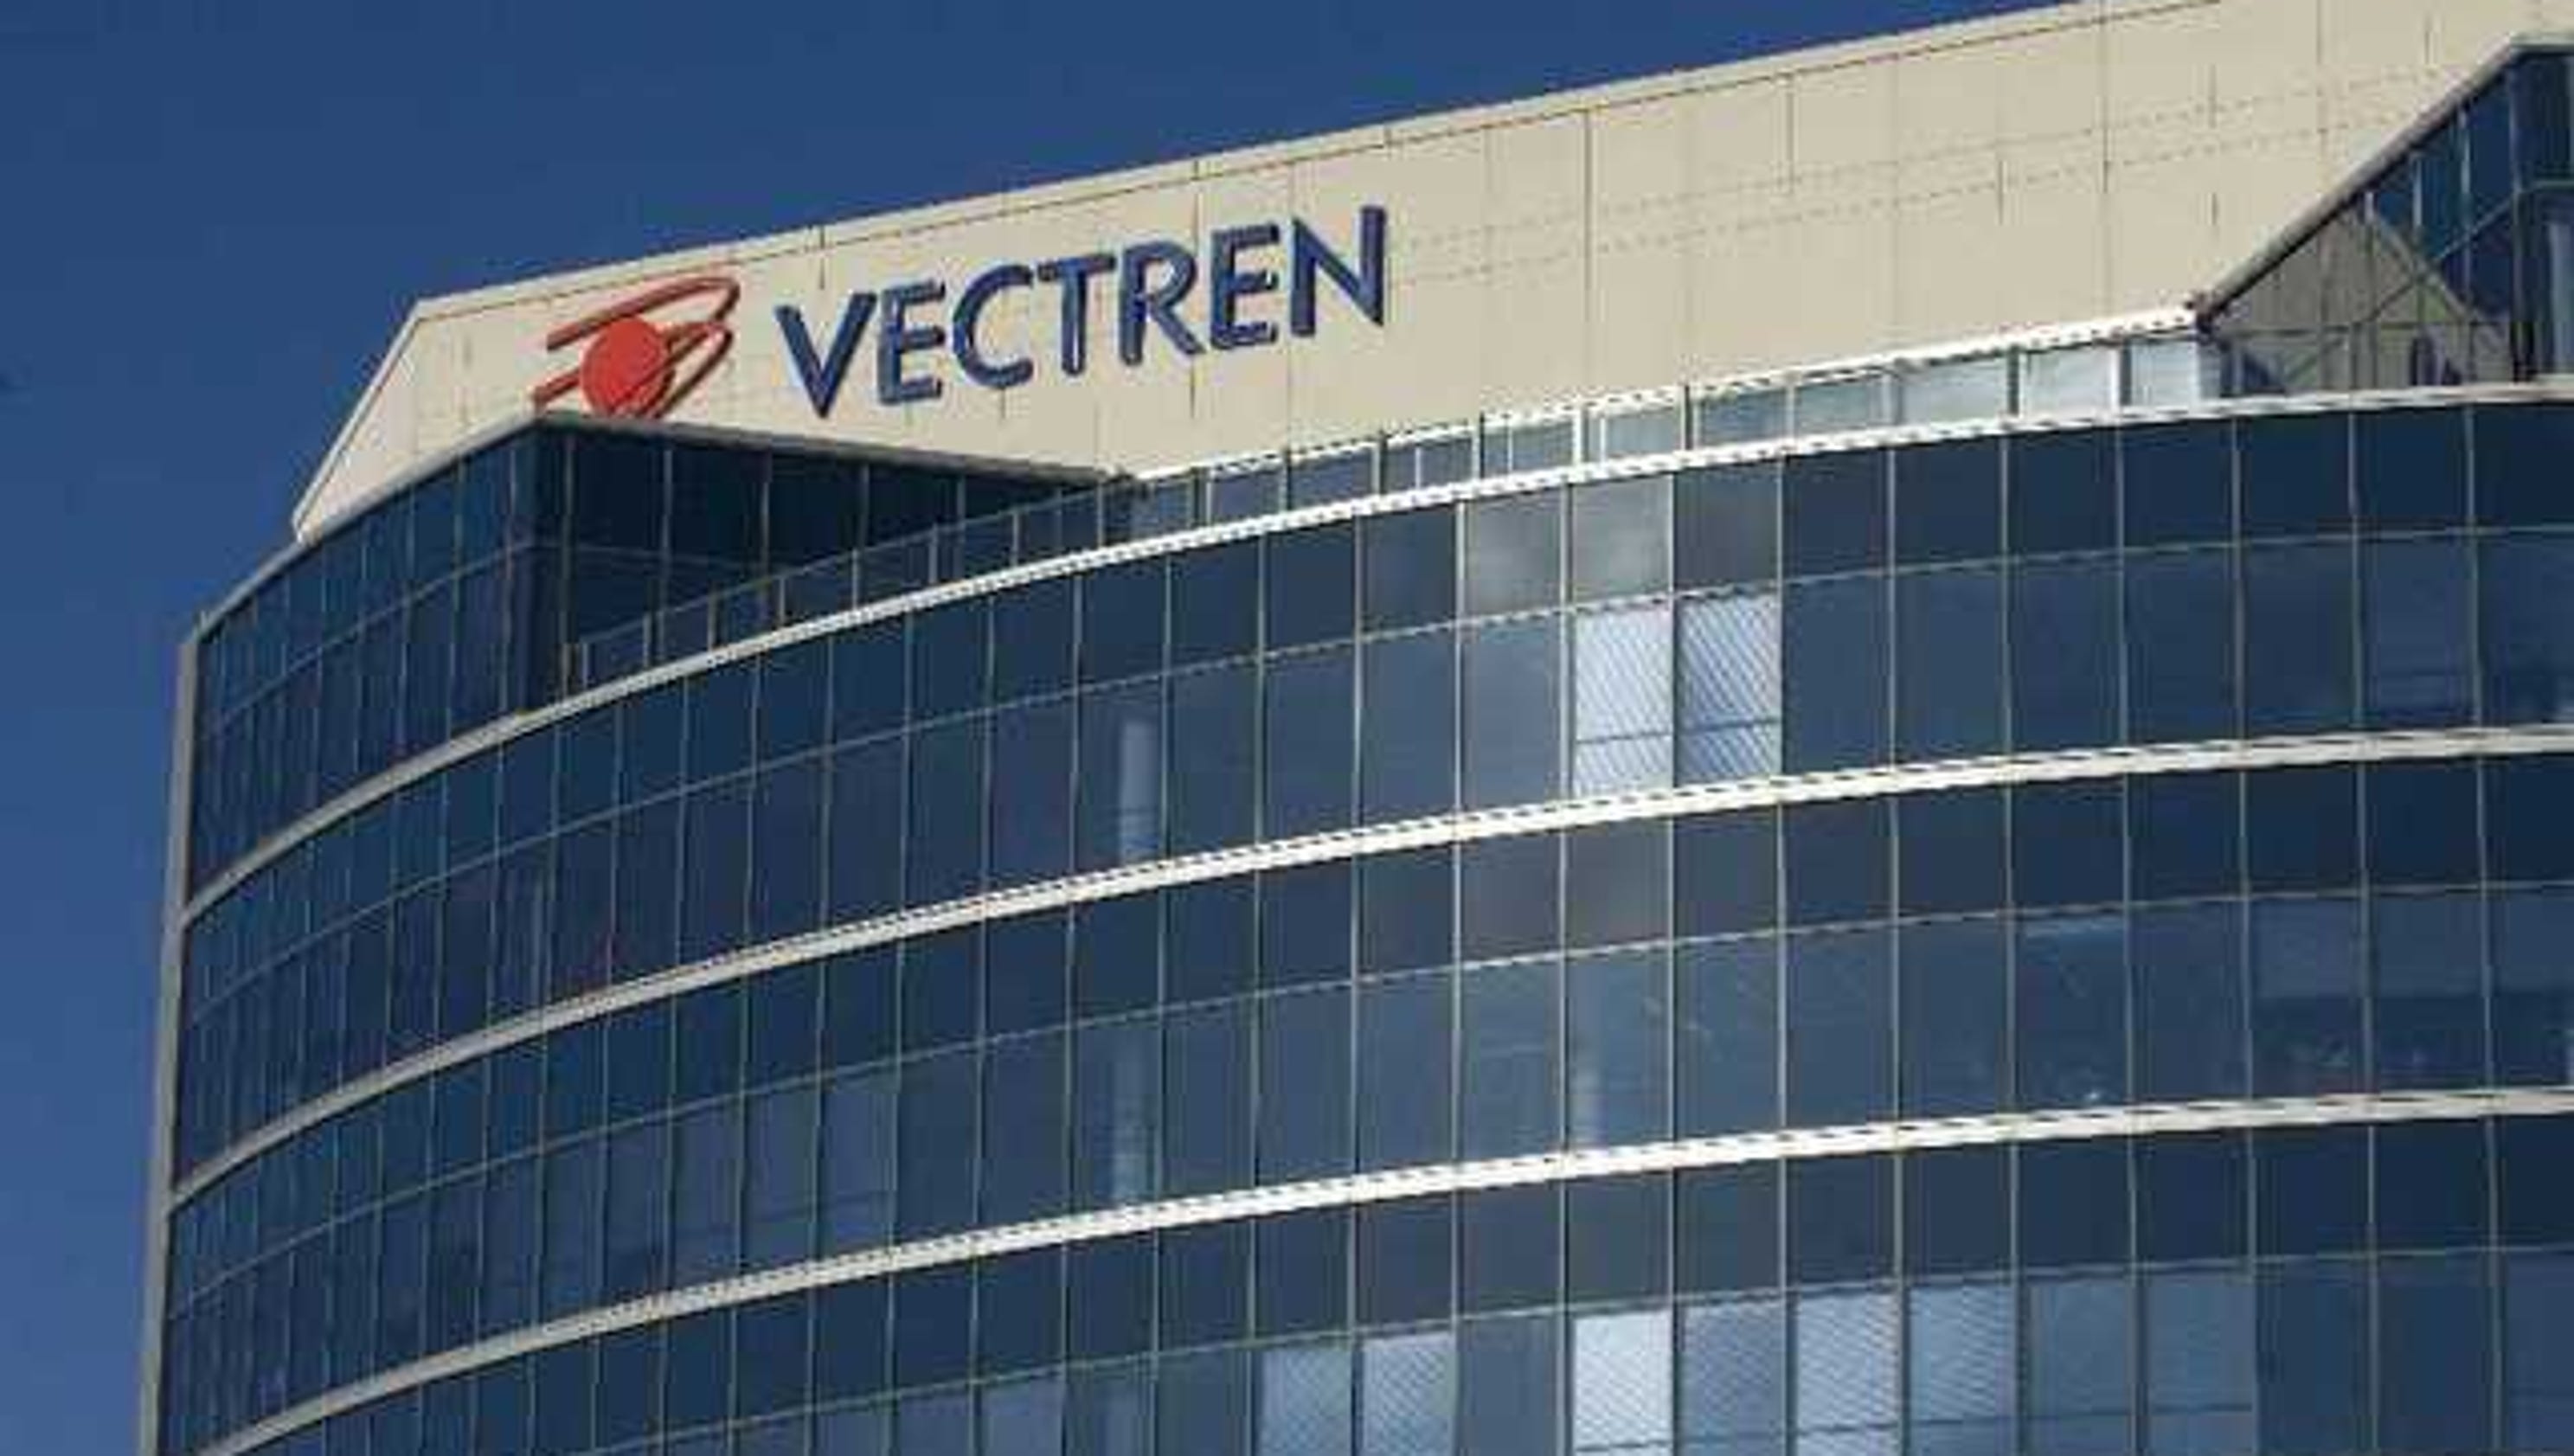 vectren-natural-gas-plant-solar-farm-to-join-energy-production